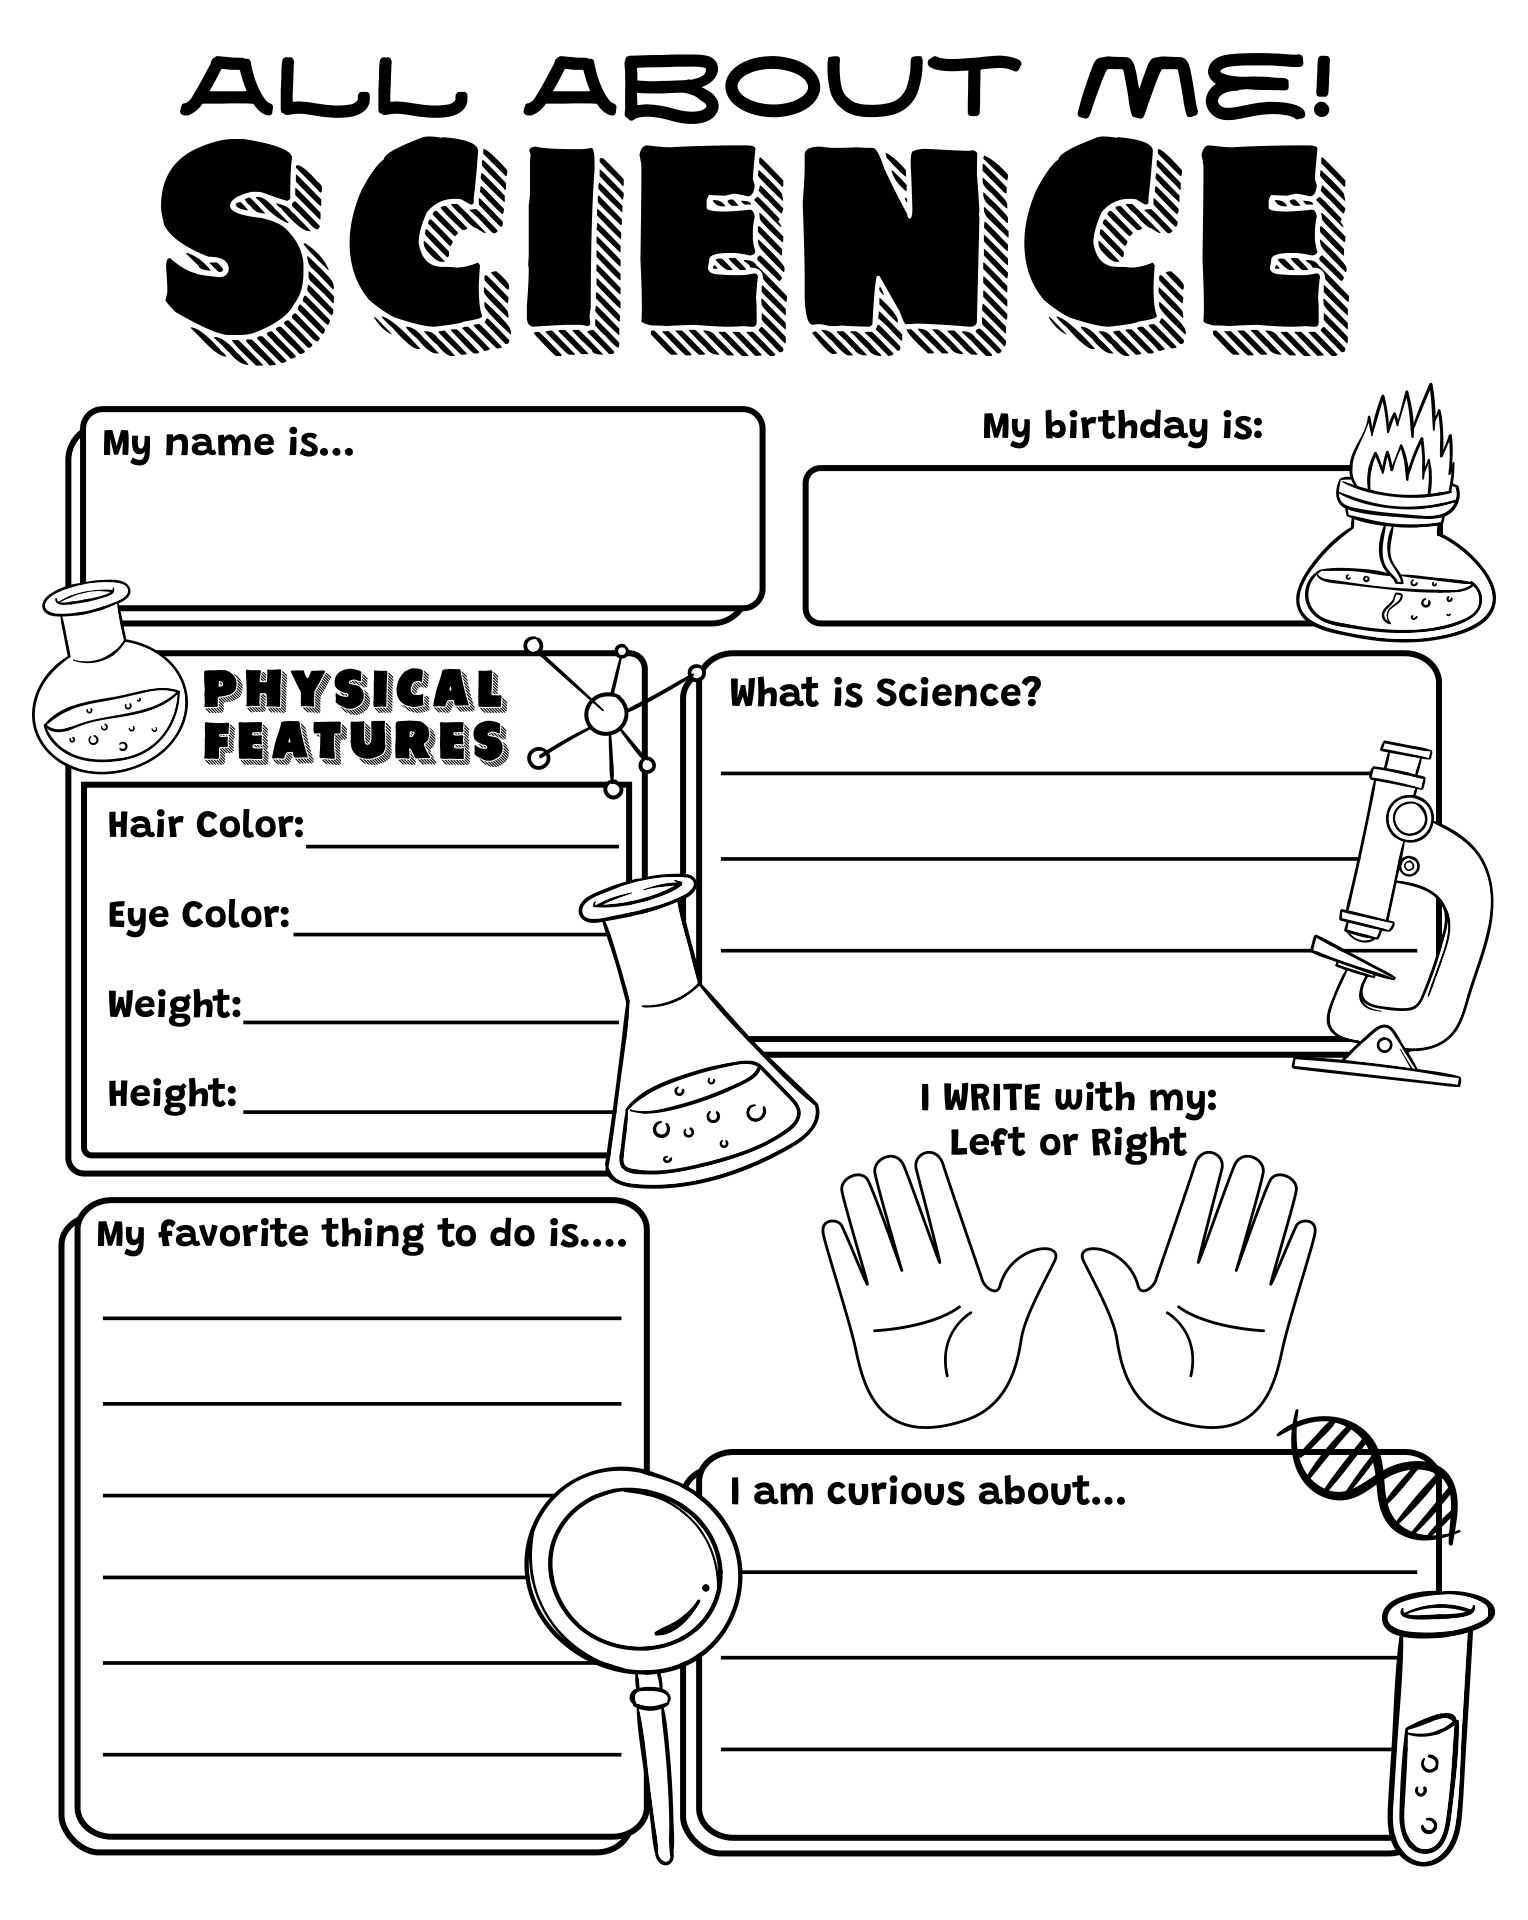 All About Me Science Activity Printable